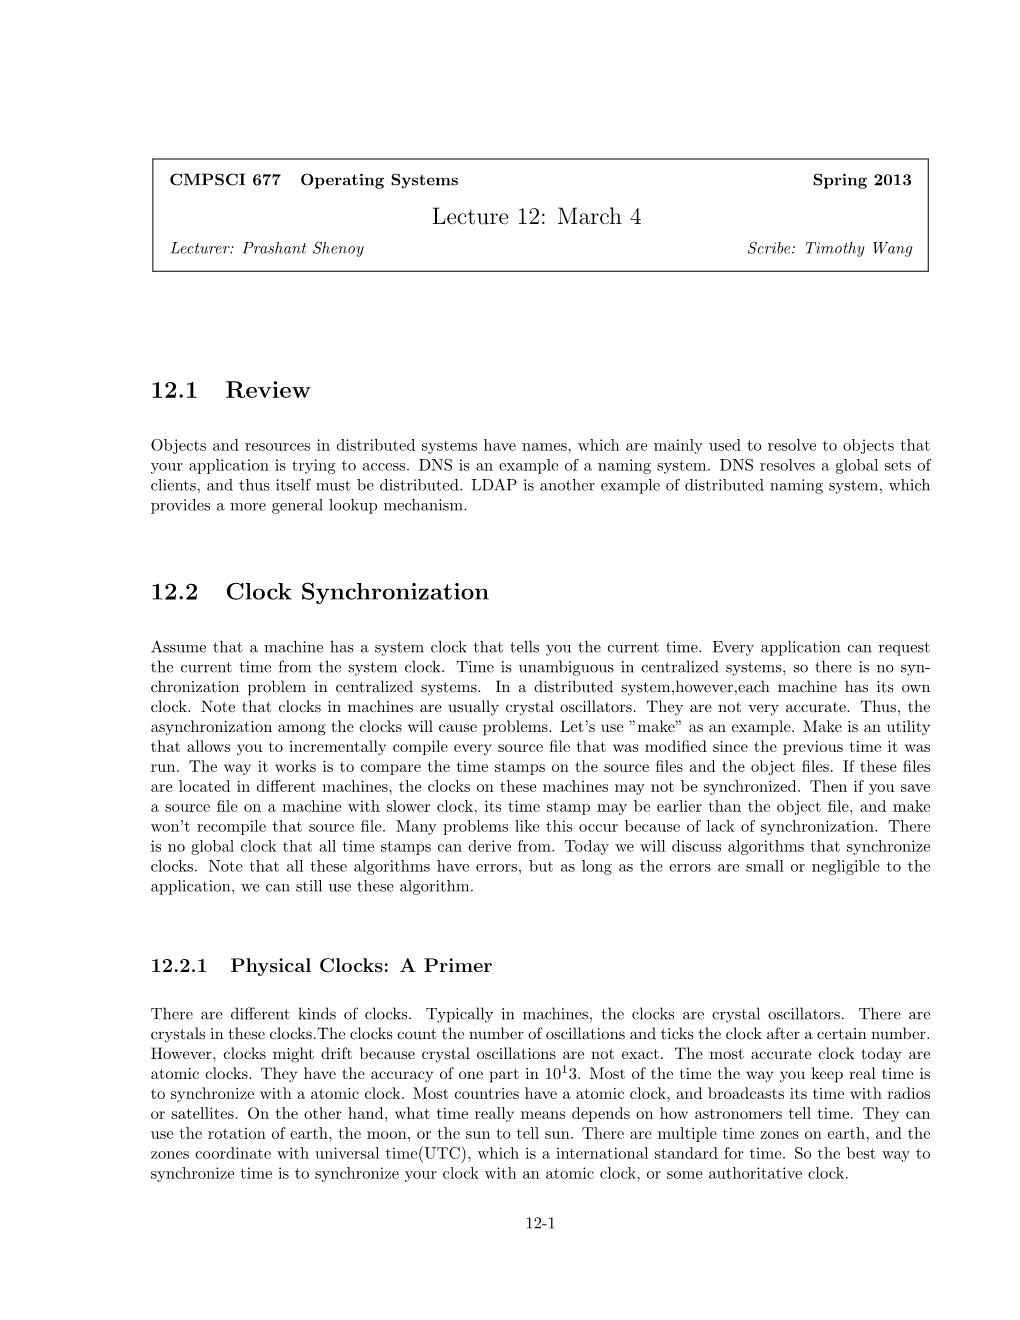 Lecture 12: March 4 12.1 Review 12.2 Clock Synchronization